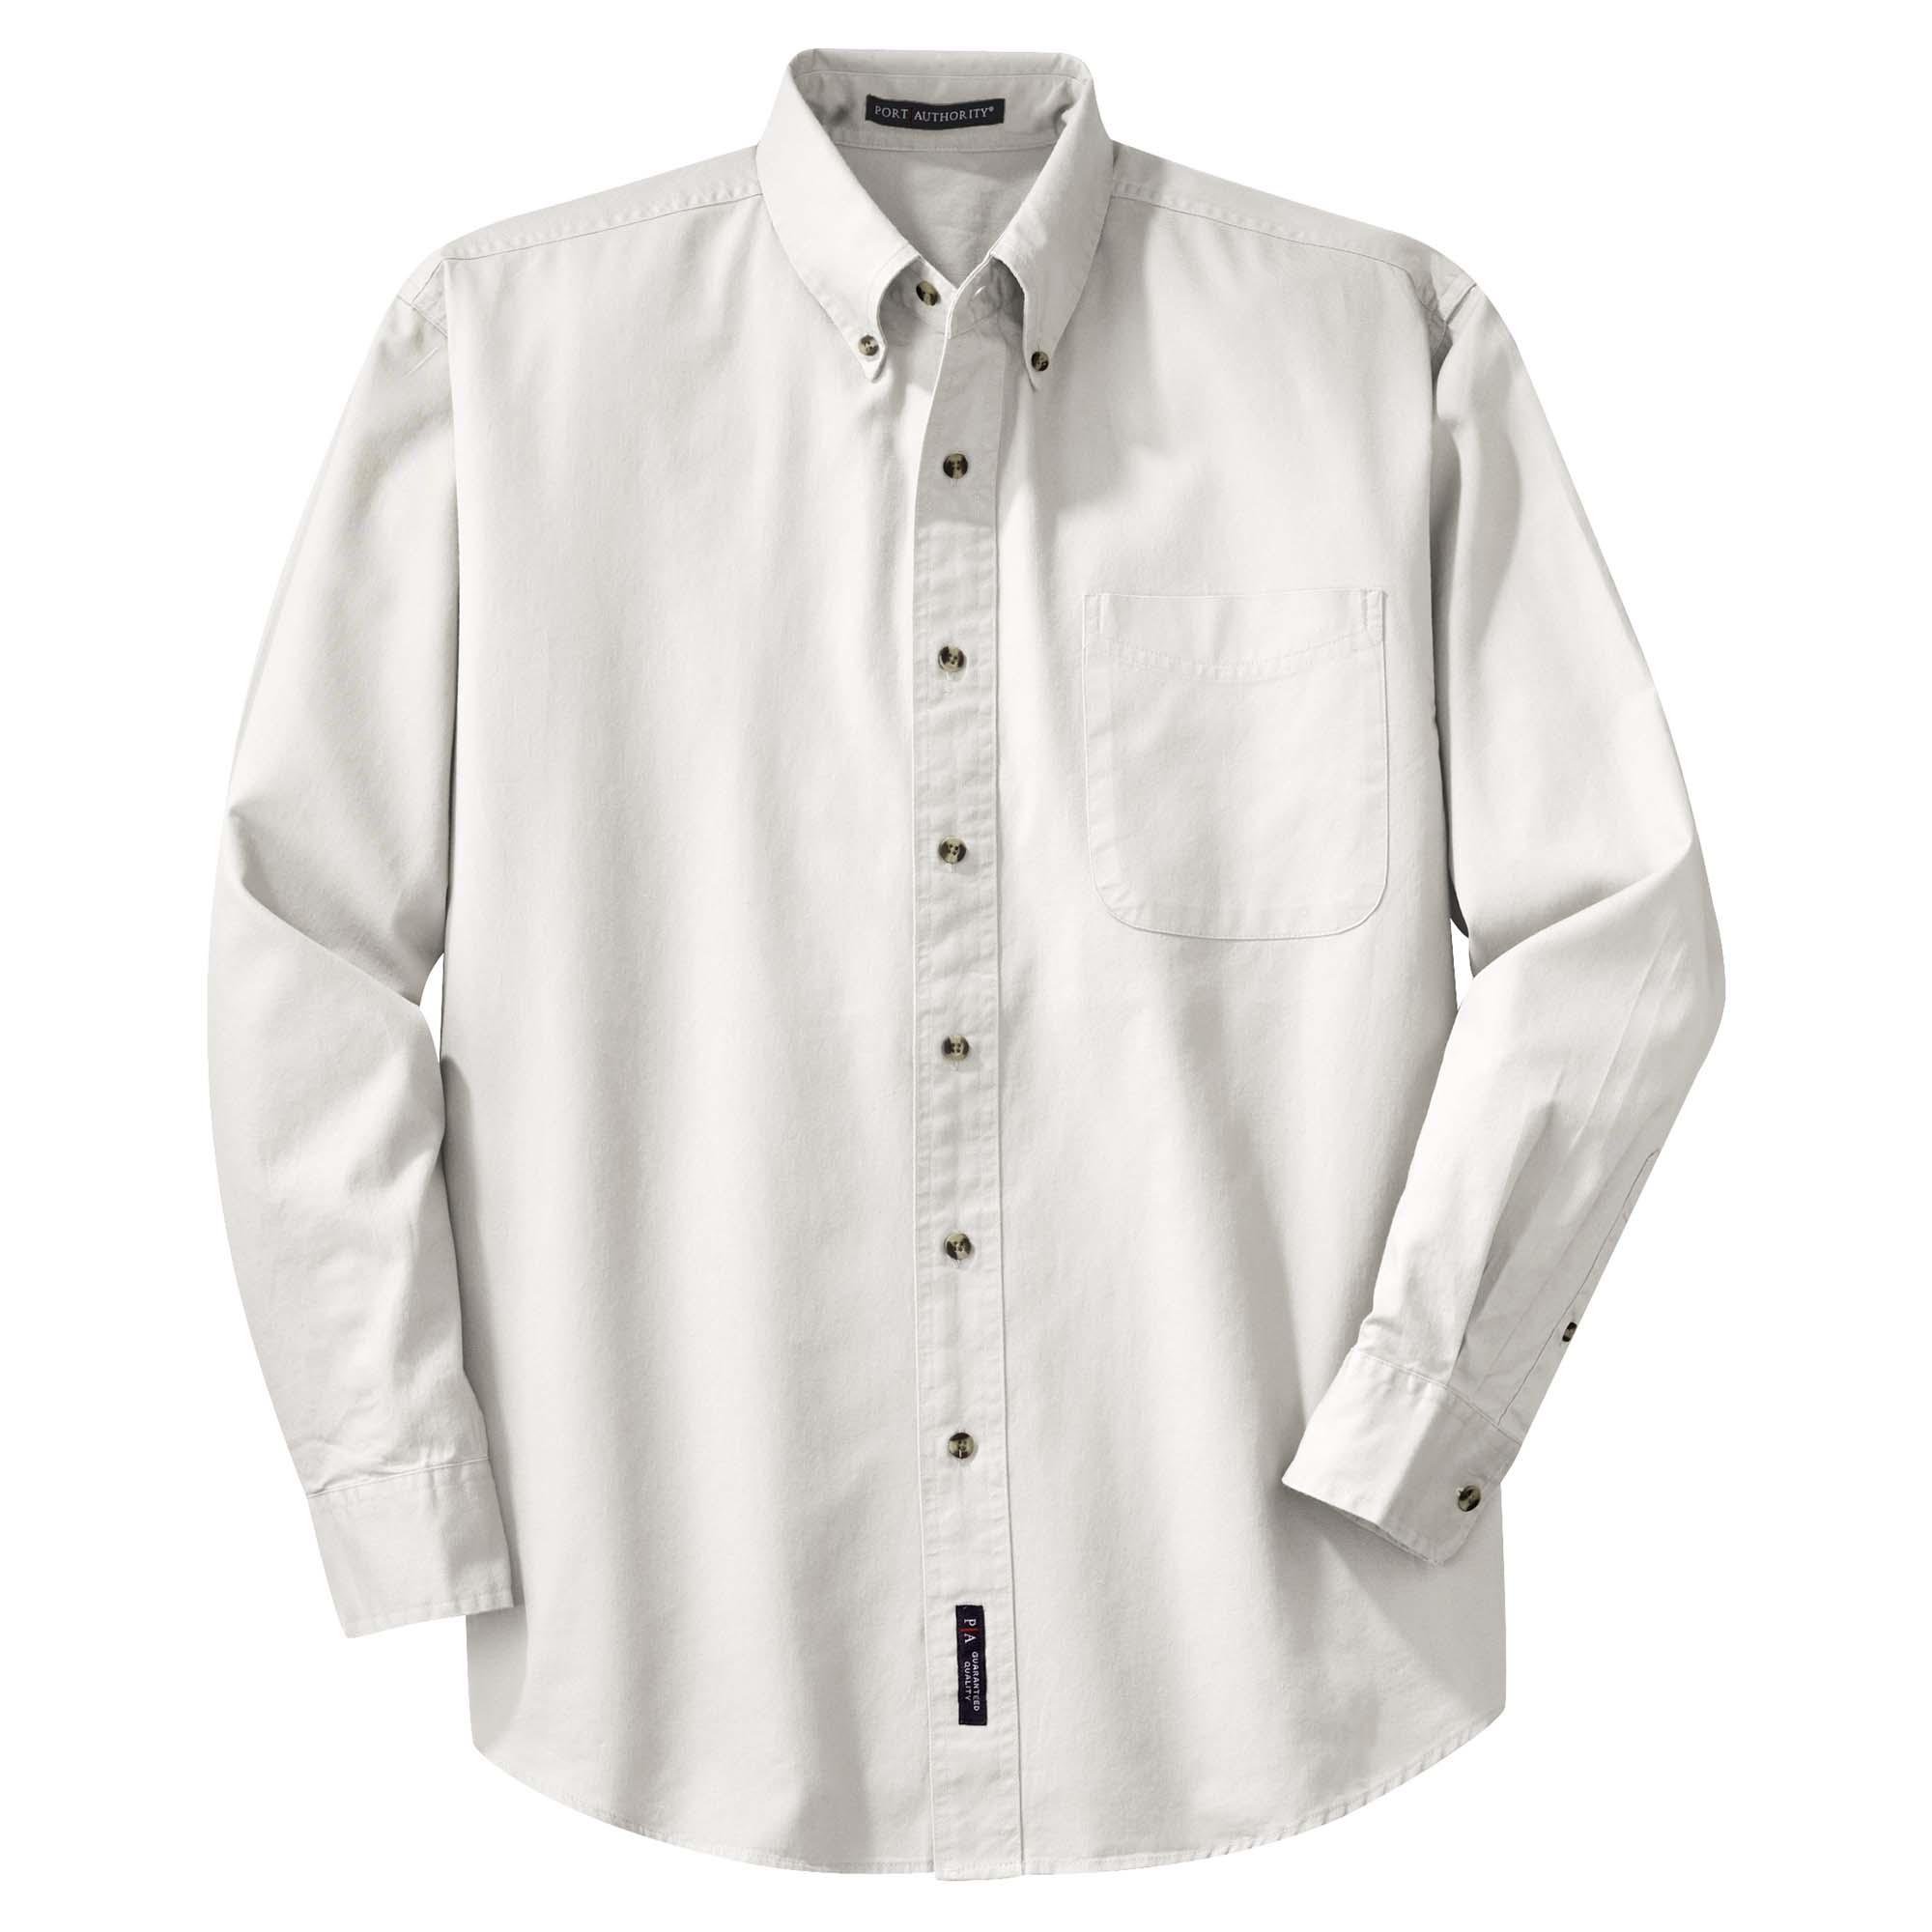 Port Authority TLS600T Tall Long Sleeve Twill Shirt - White | Full Source